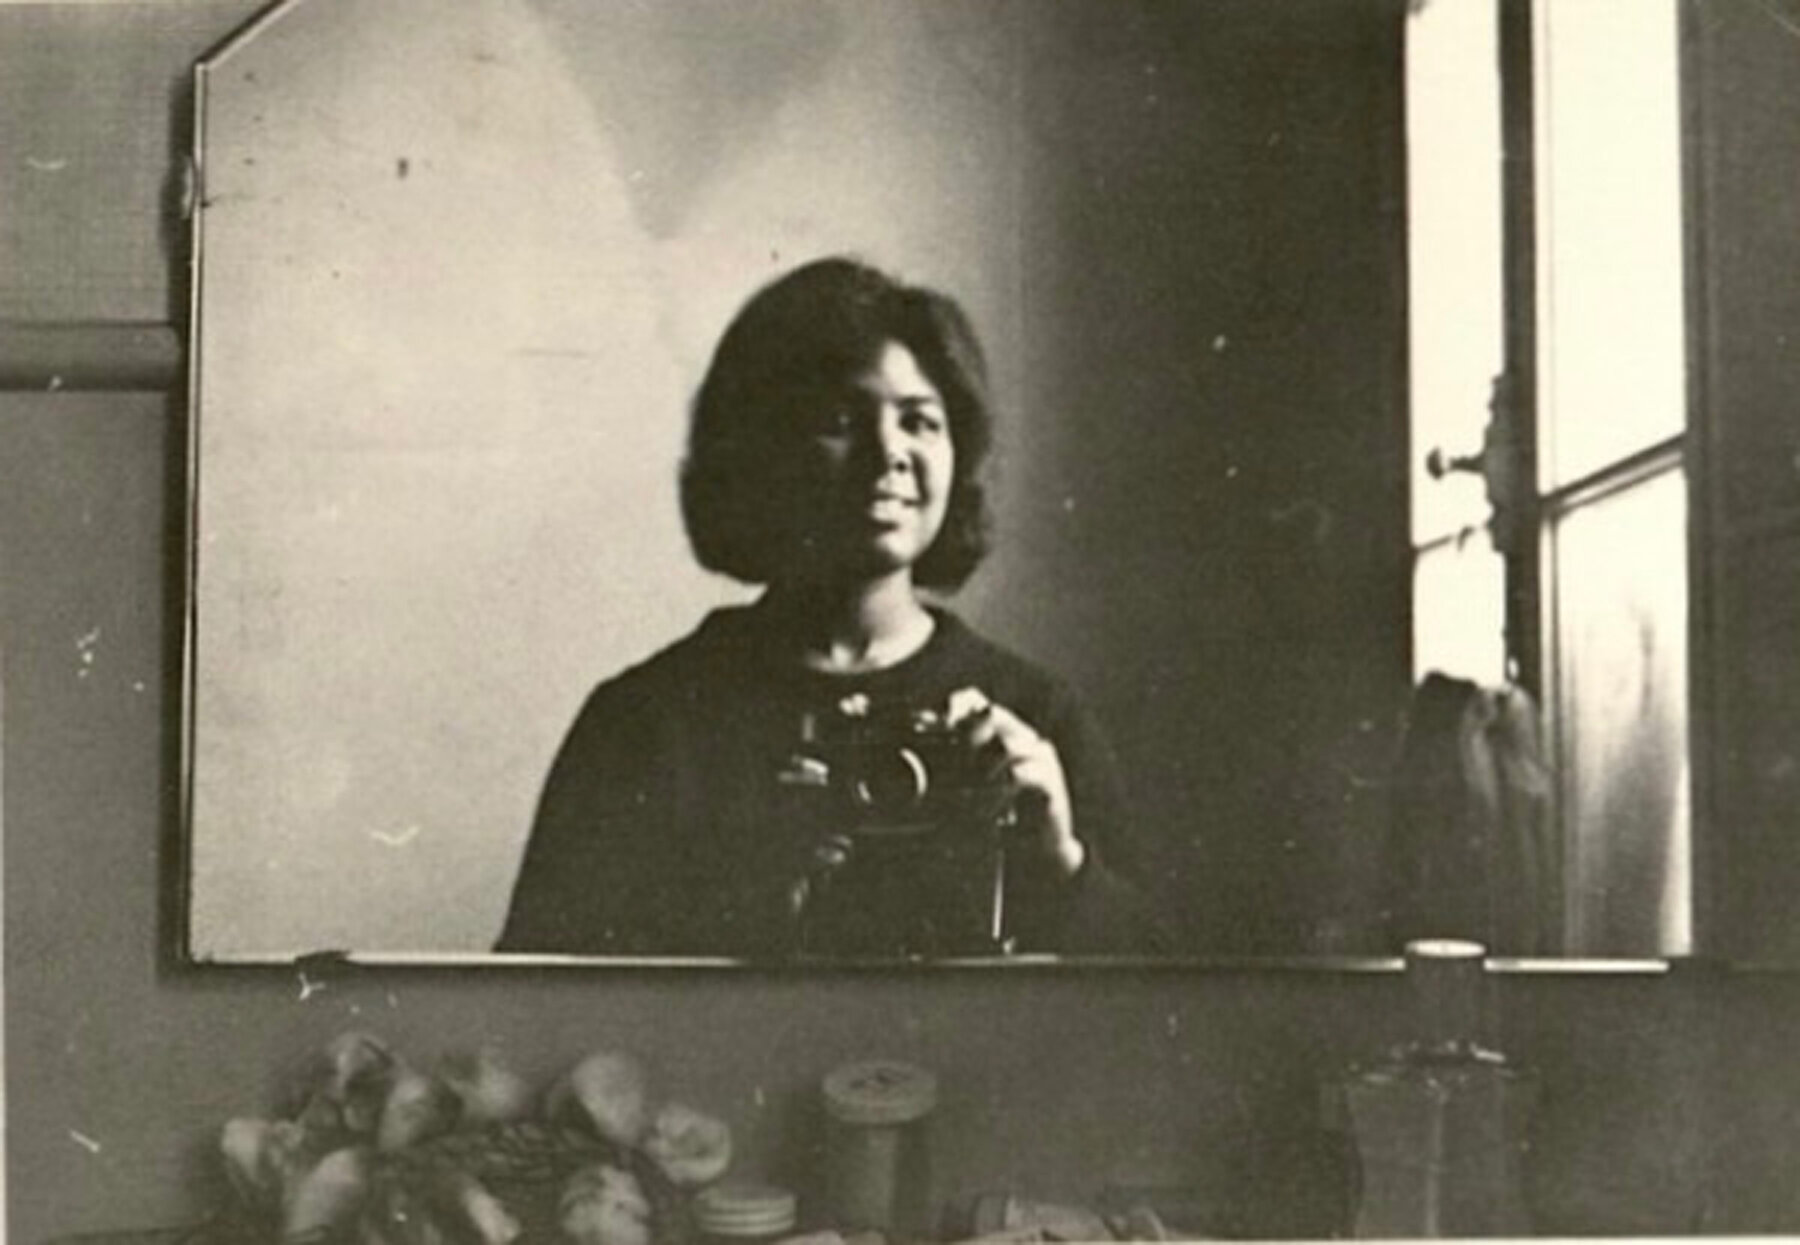 A black-and-white self-portrait of a smiling woman taken in a mirror.